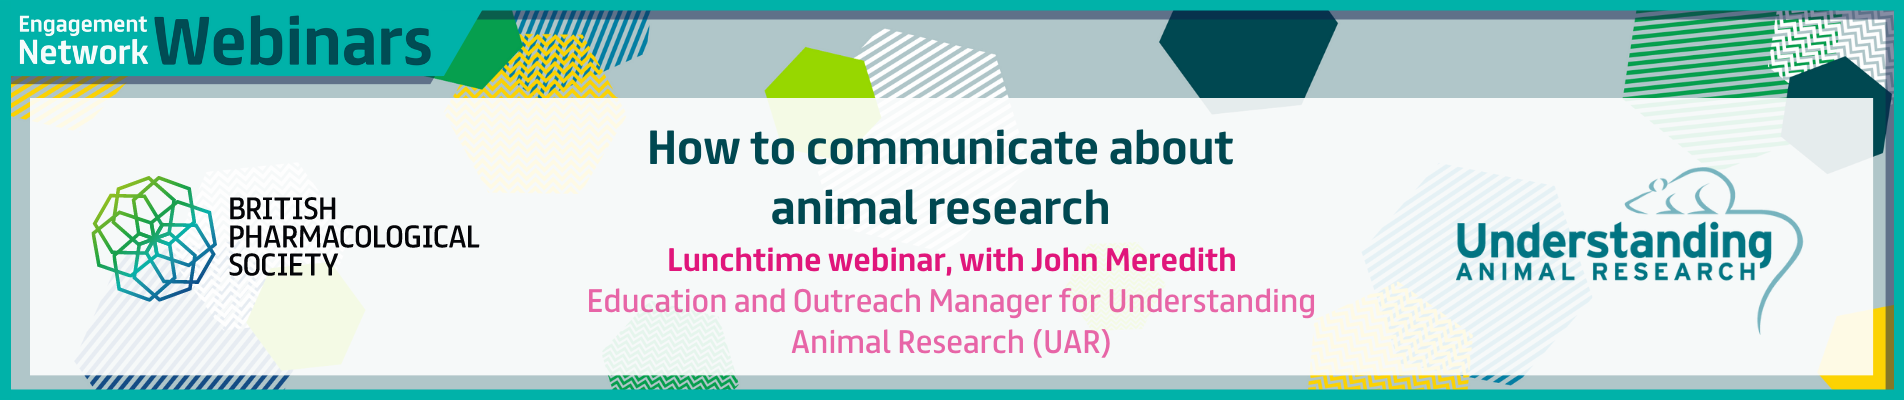 Engagement Webinar: How to communicate about animal research